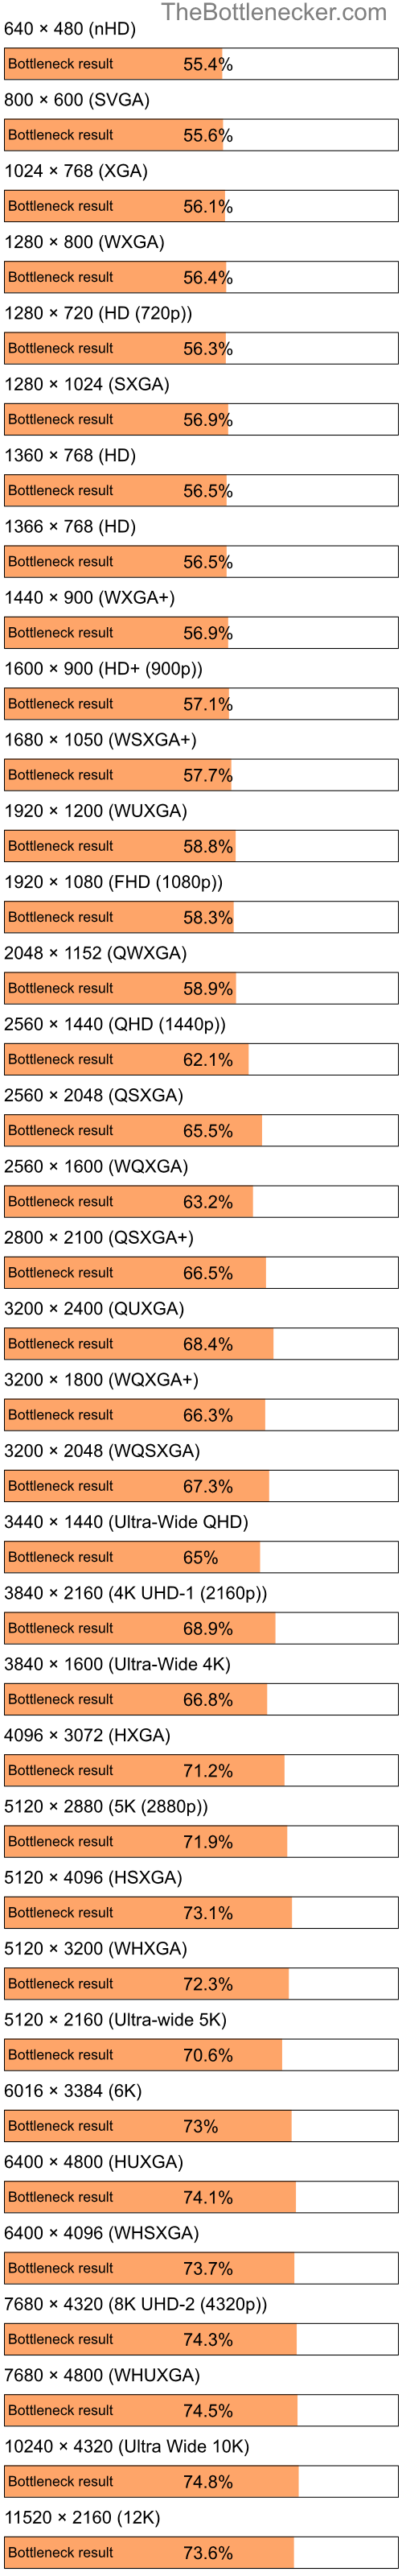 Bottleneck results by resolution for Intel Atom N270 and AMD Mobility Radeon HD 3450 in Processor Intense Tasks